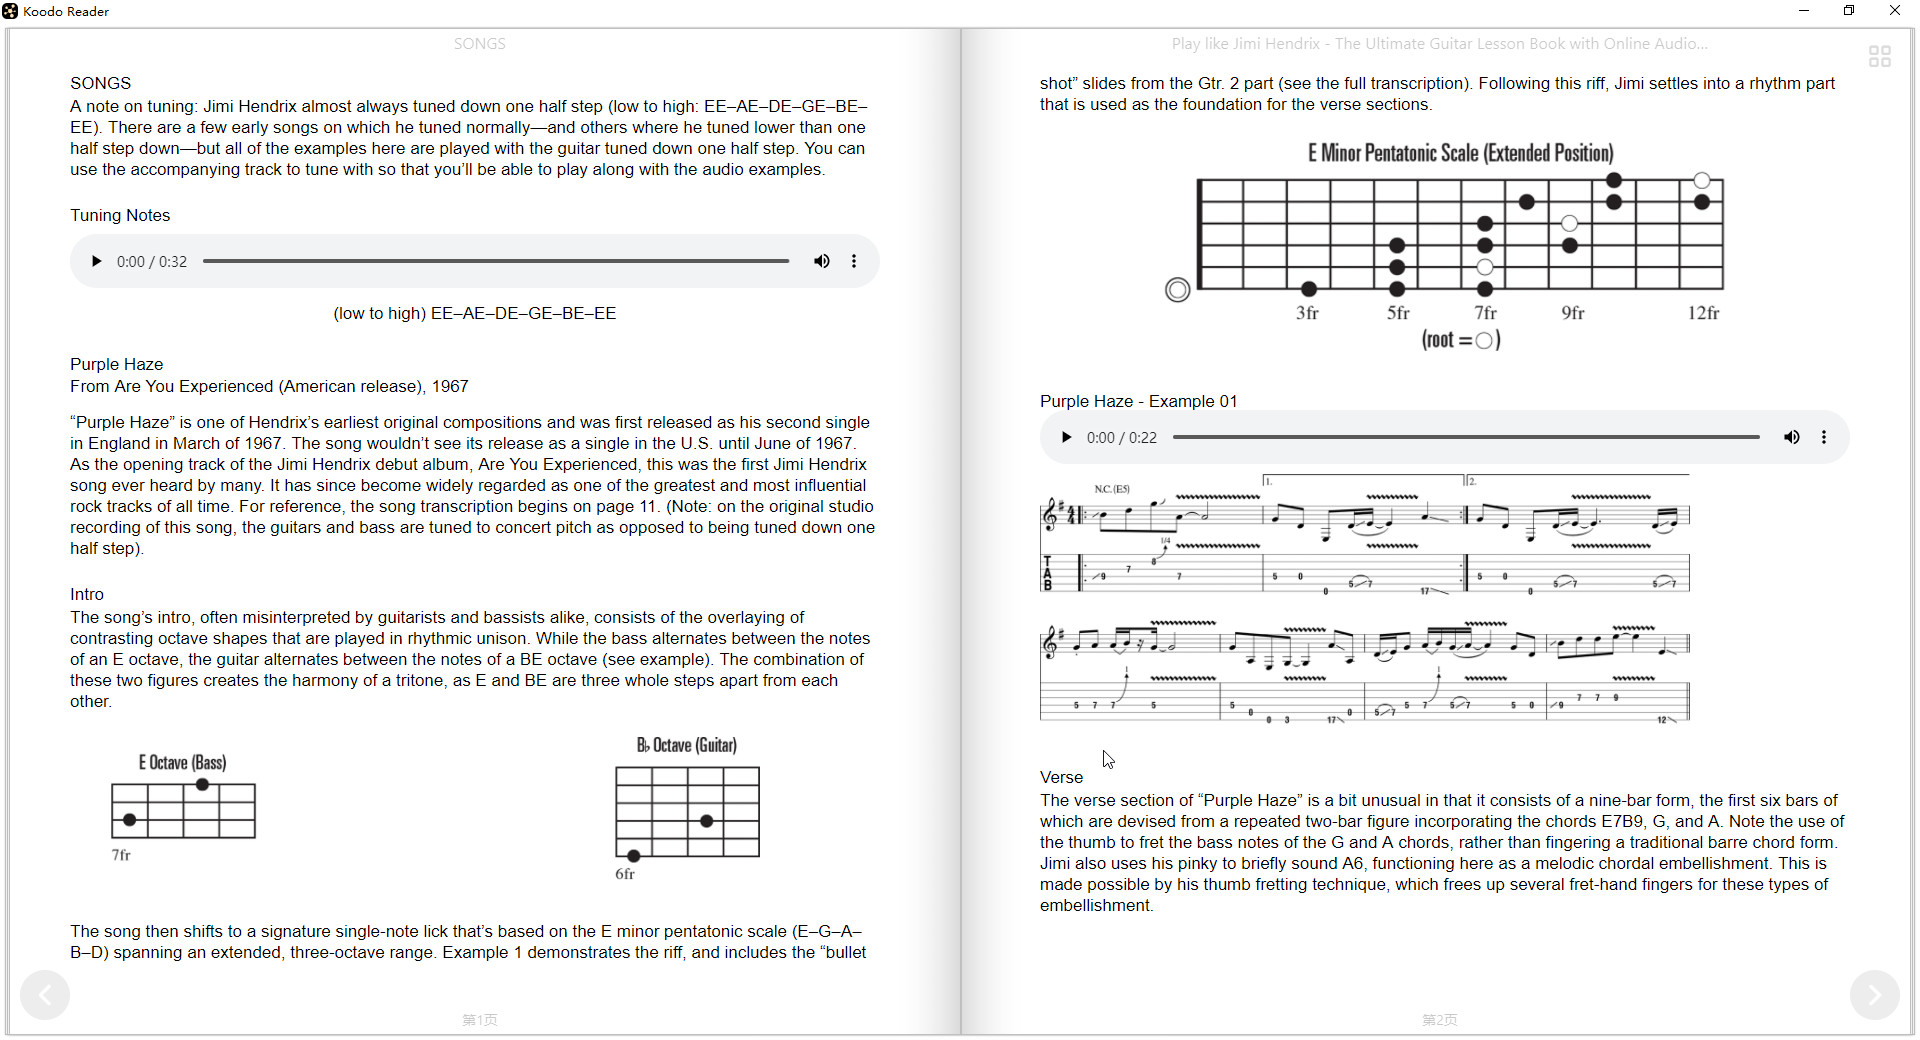 Play like Jimi Hendrix: The Ultimate Guitar Lesson Book with Online Audio Tracks [EPUB]（73MB）插图1